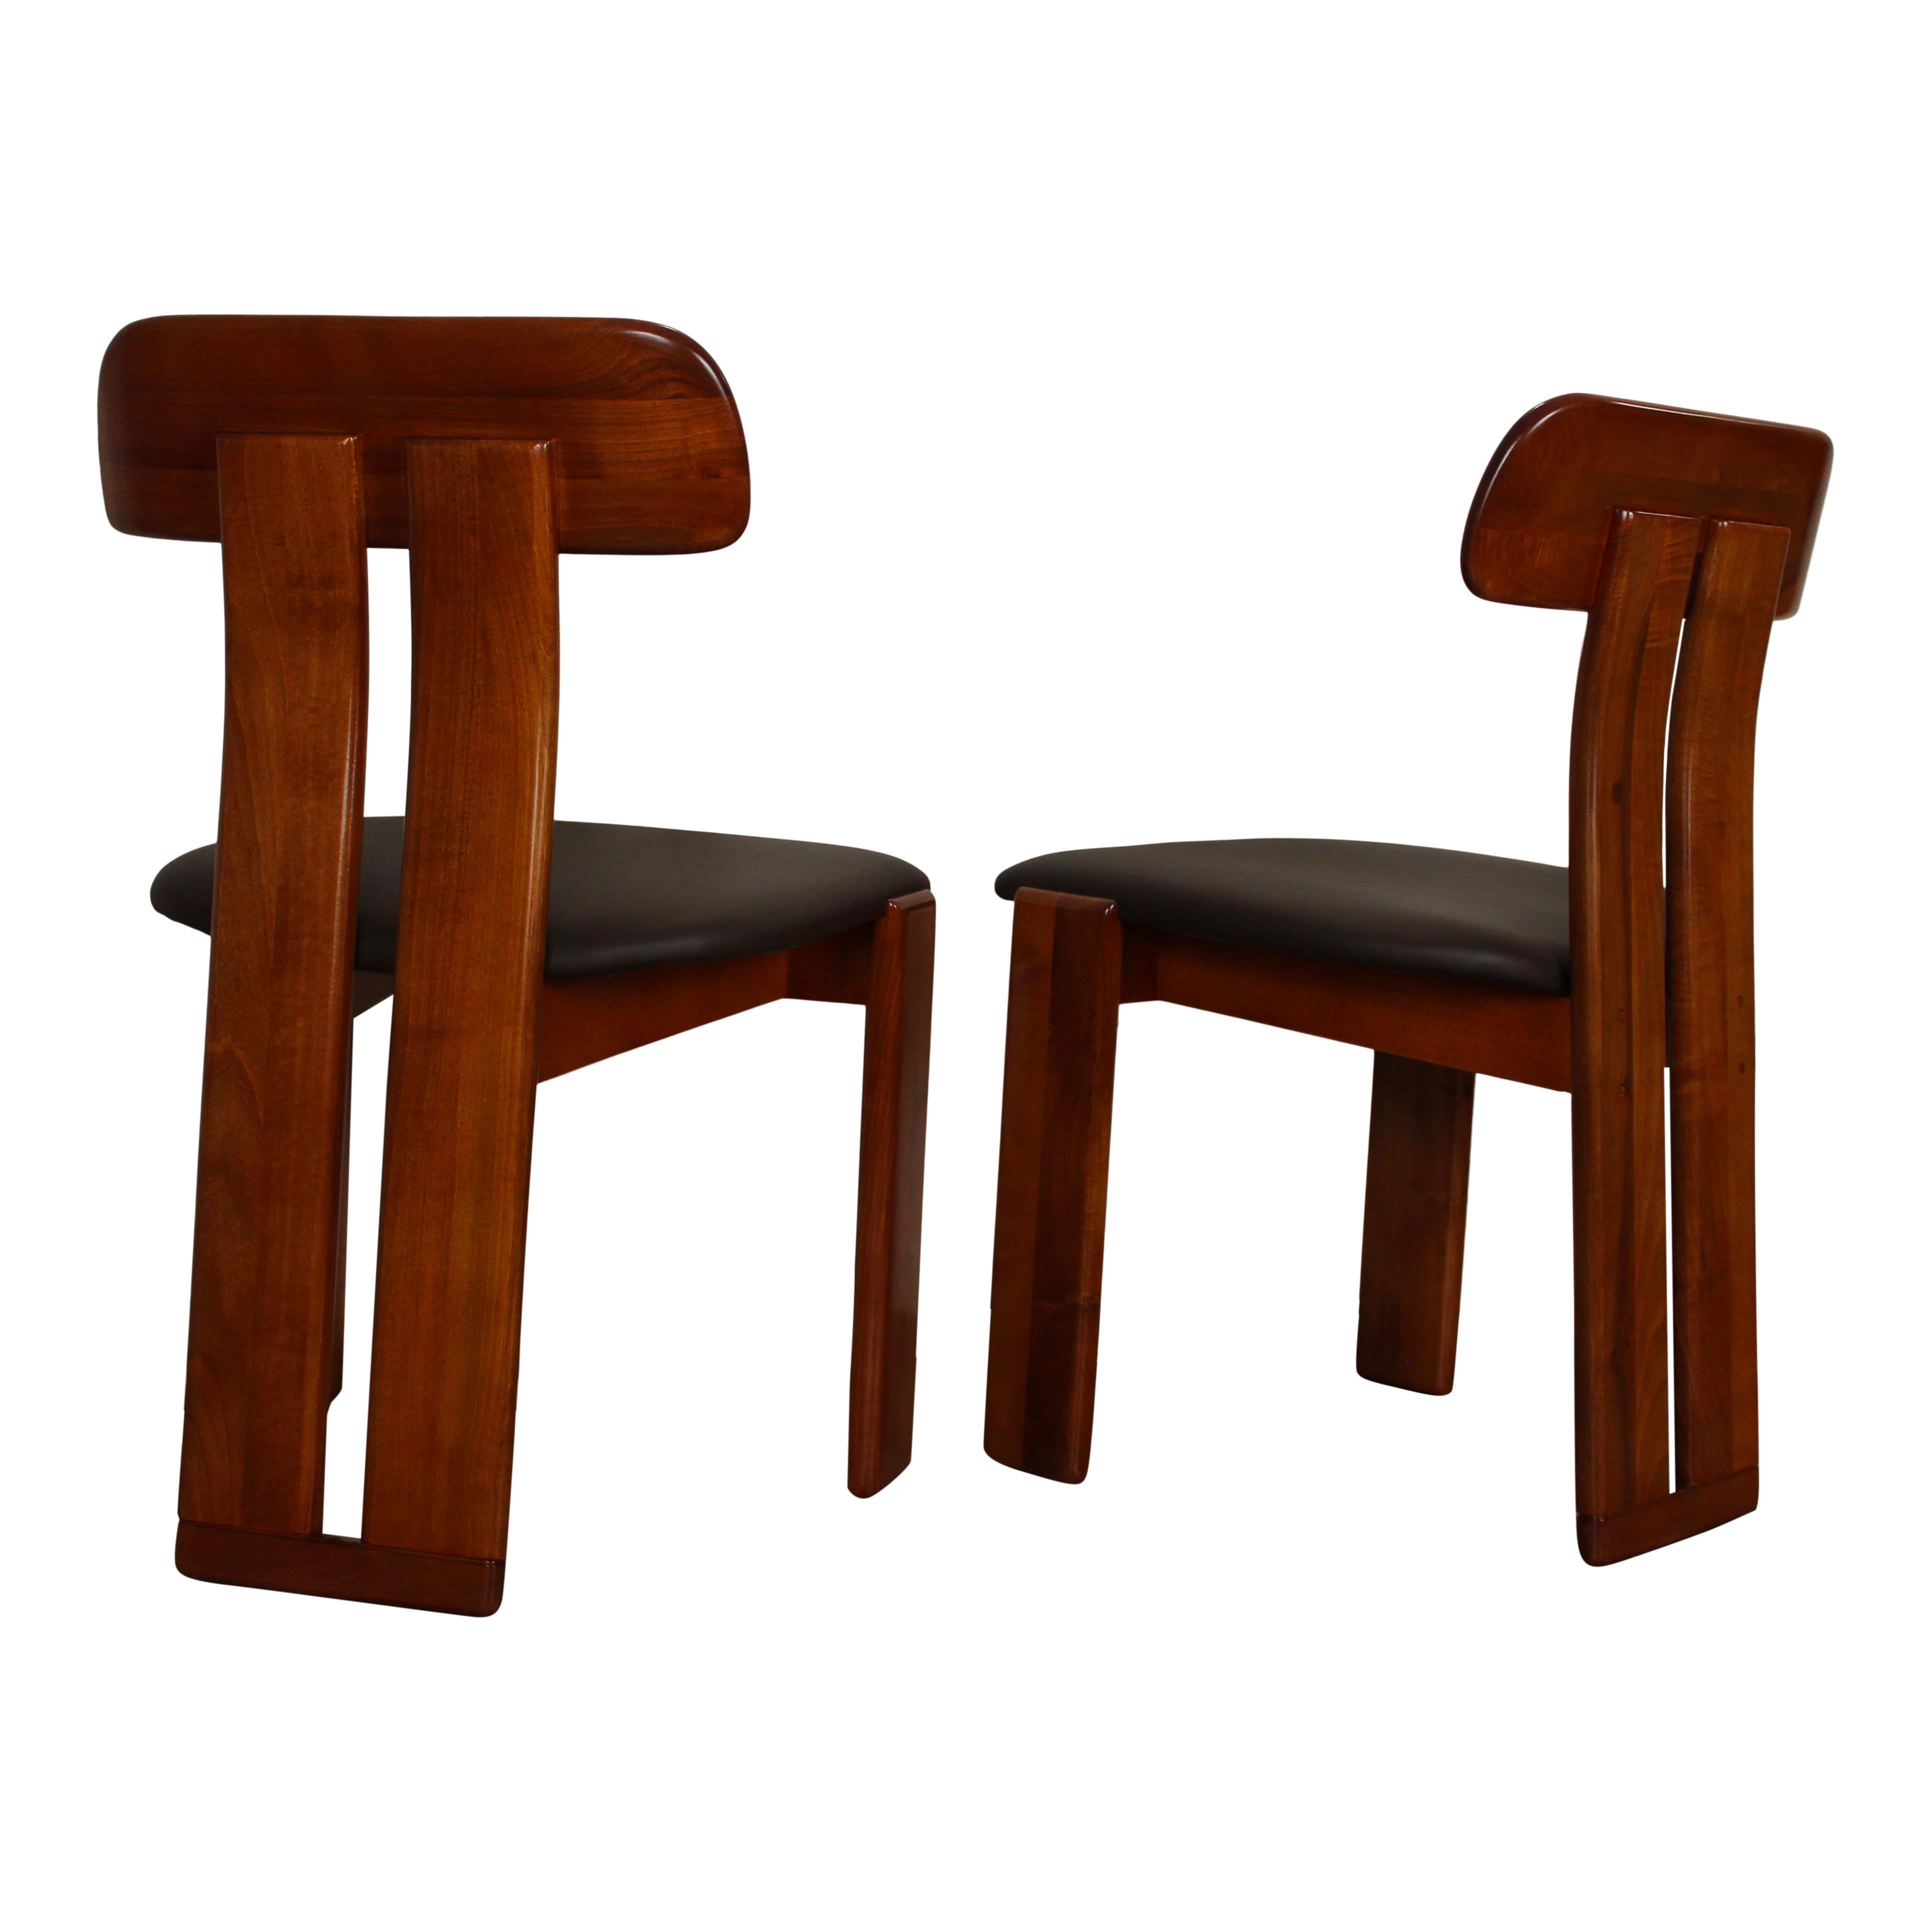 Leather Mario Marenco Walnut Sapporo Dining Chairs for Mobilgirgi, 1970s, Set of 8 For Sale